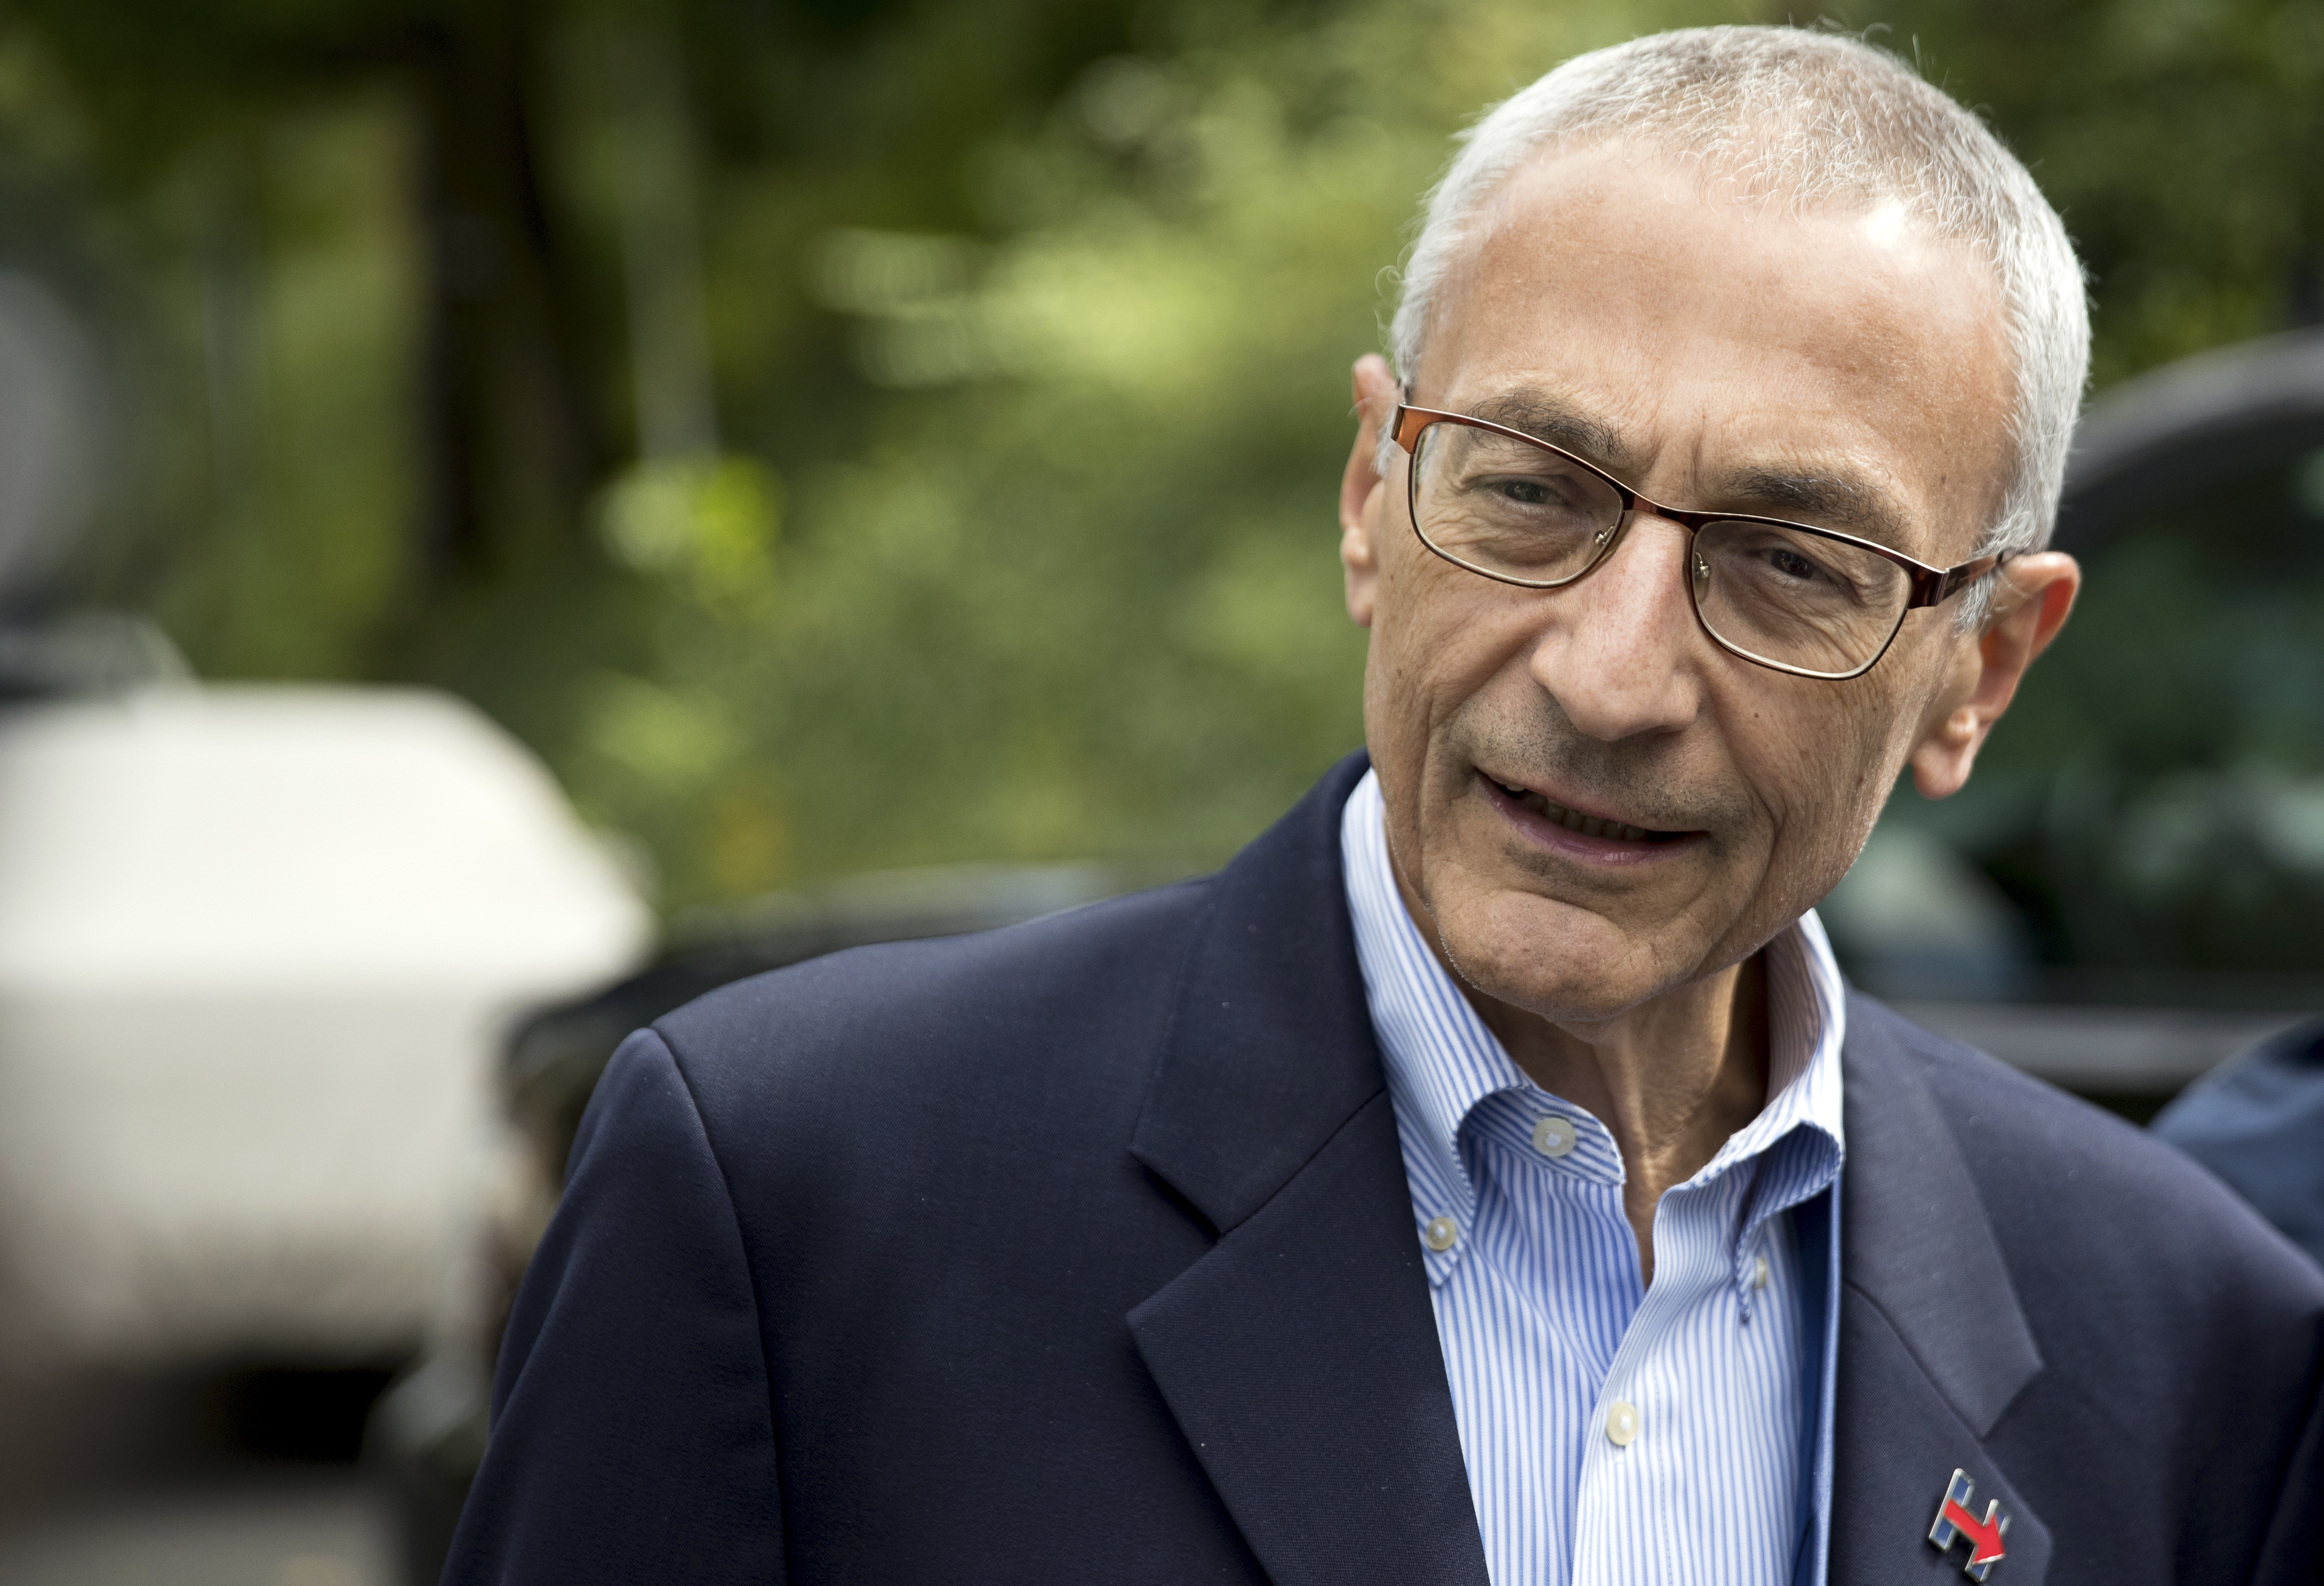 In this Oct. 5, 2016, photo, Hillary Clinton campaign chairman John Podesta speaks to members of the media outside Clinton's home in Washington. (Andrew Harnik—AP)